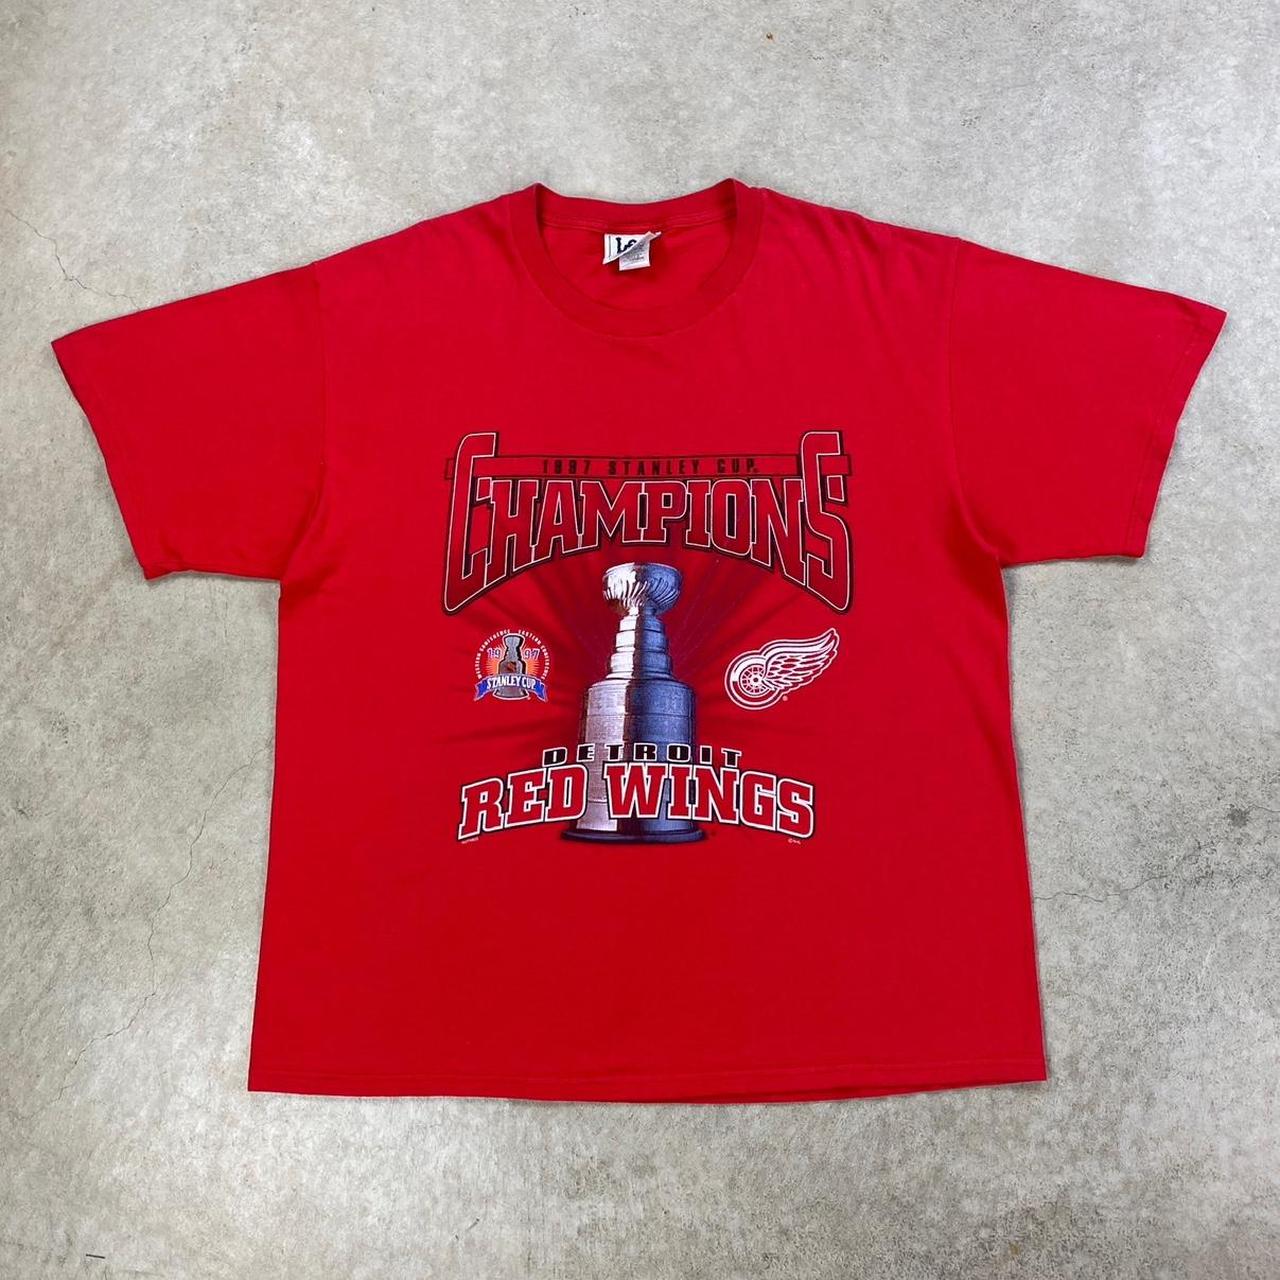 Vintage 1997 Detroit Red Wings Stanley Cup Champions T-Shirt